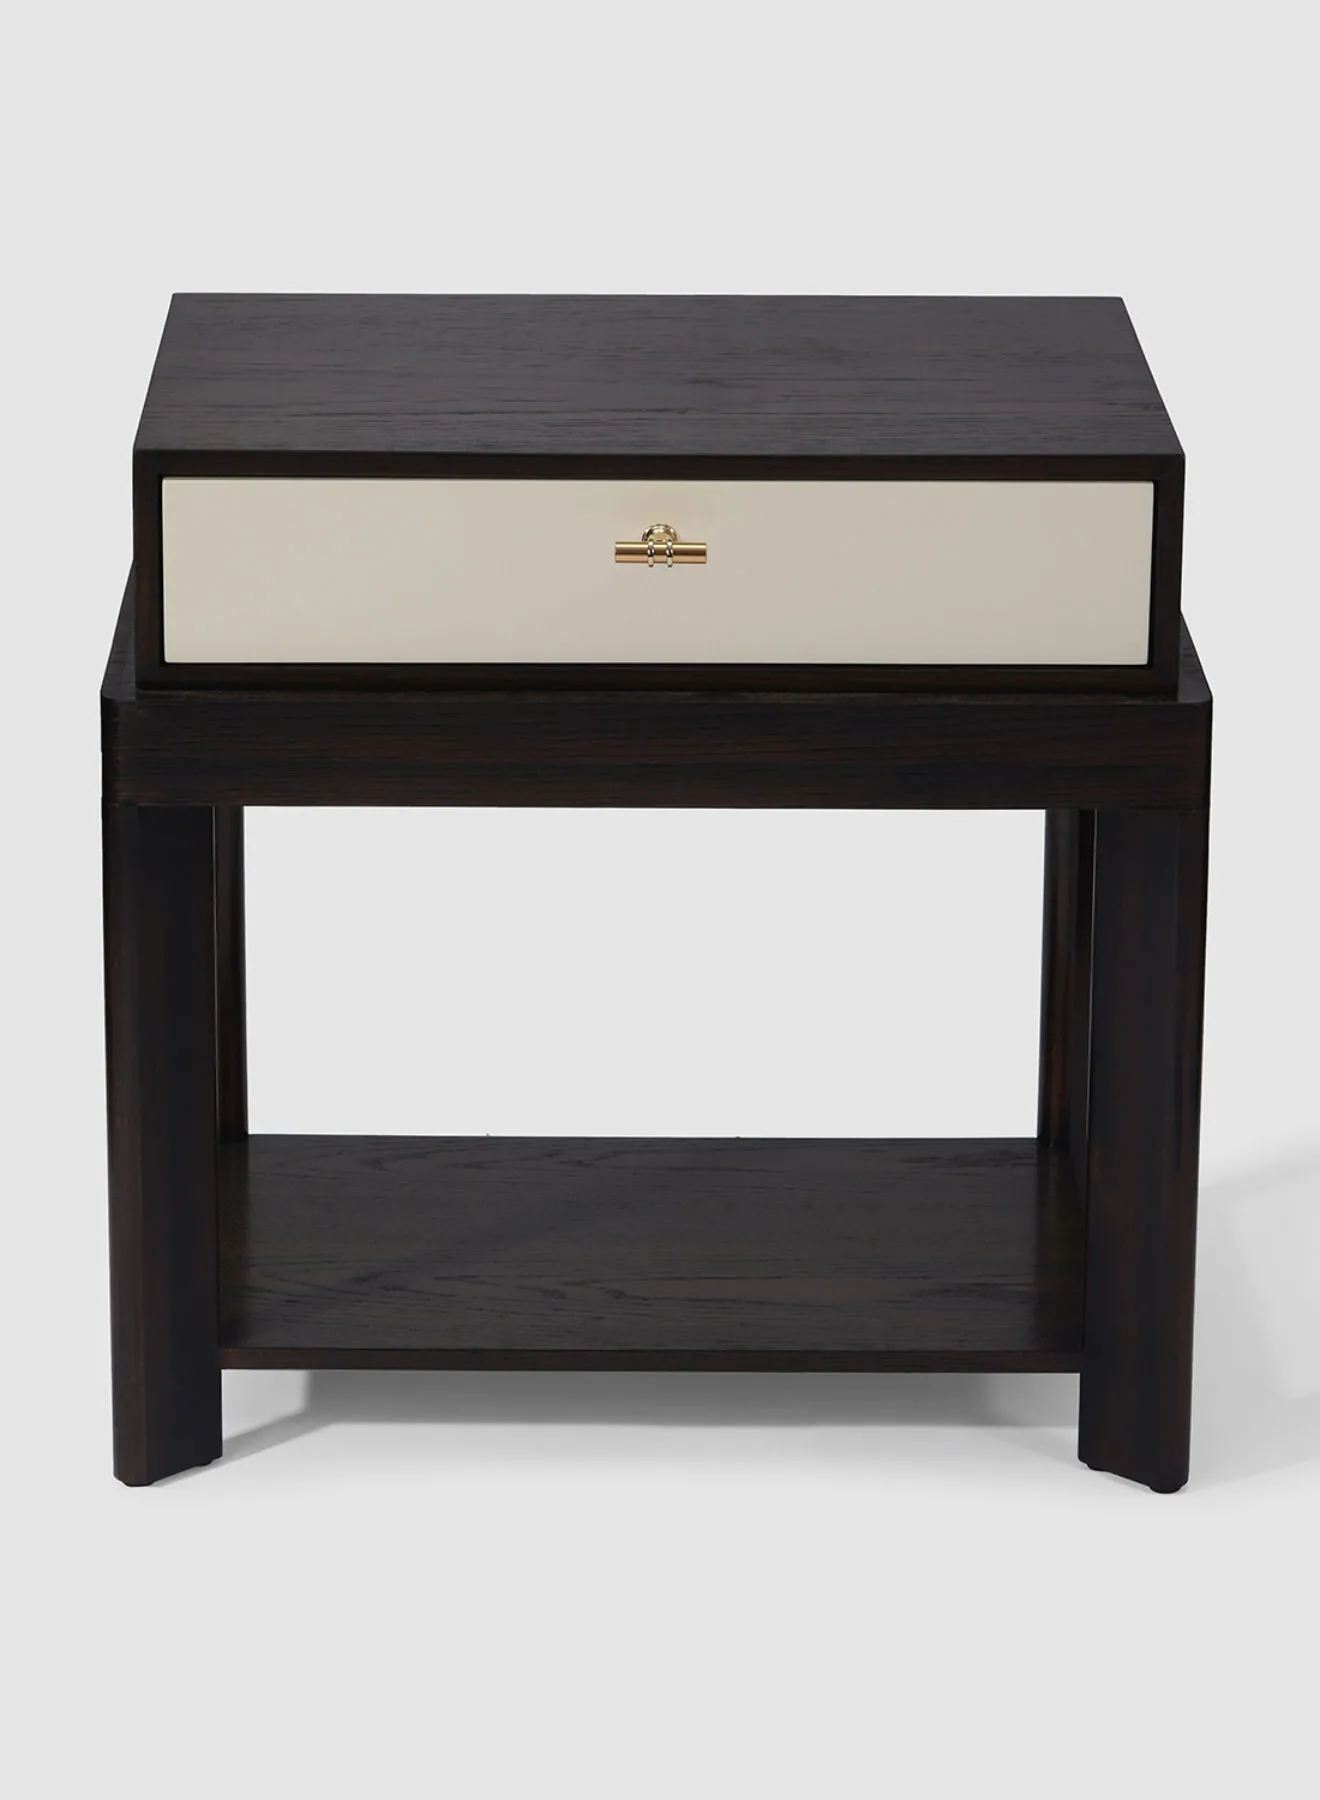 ebb & flow Bedside Table Luxurious - Size 610 X 435 X 600mm Wood Brown/Black Nightstand Comdina - Bedroom Furniture